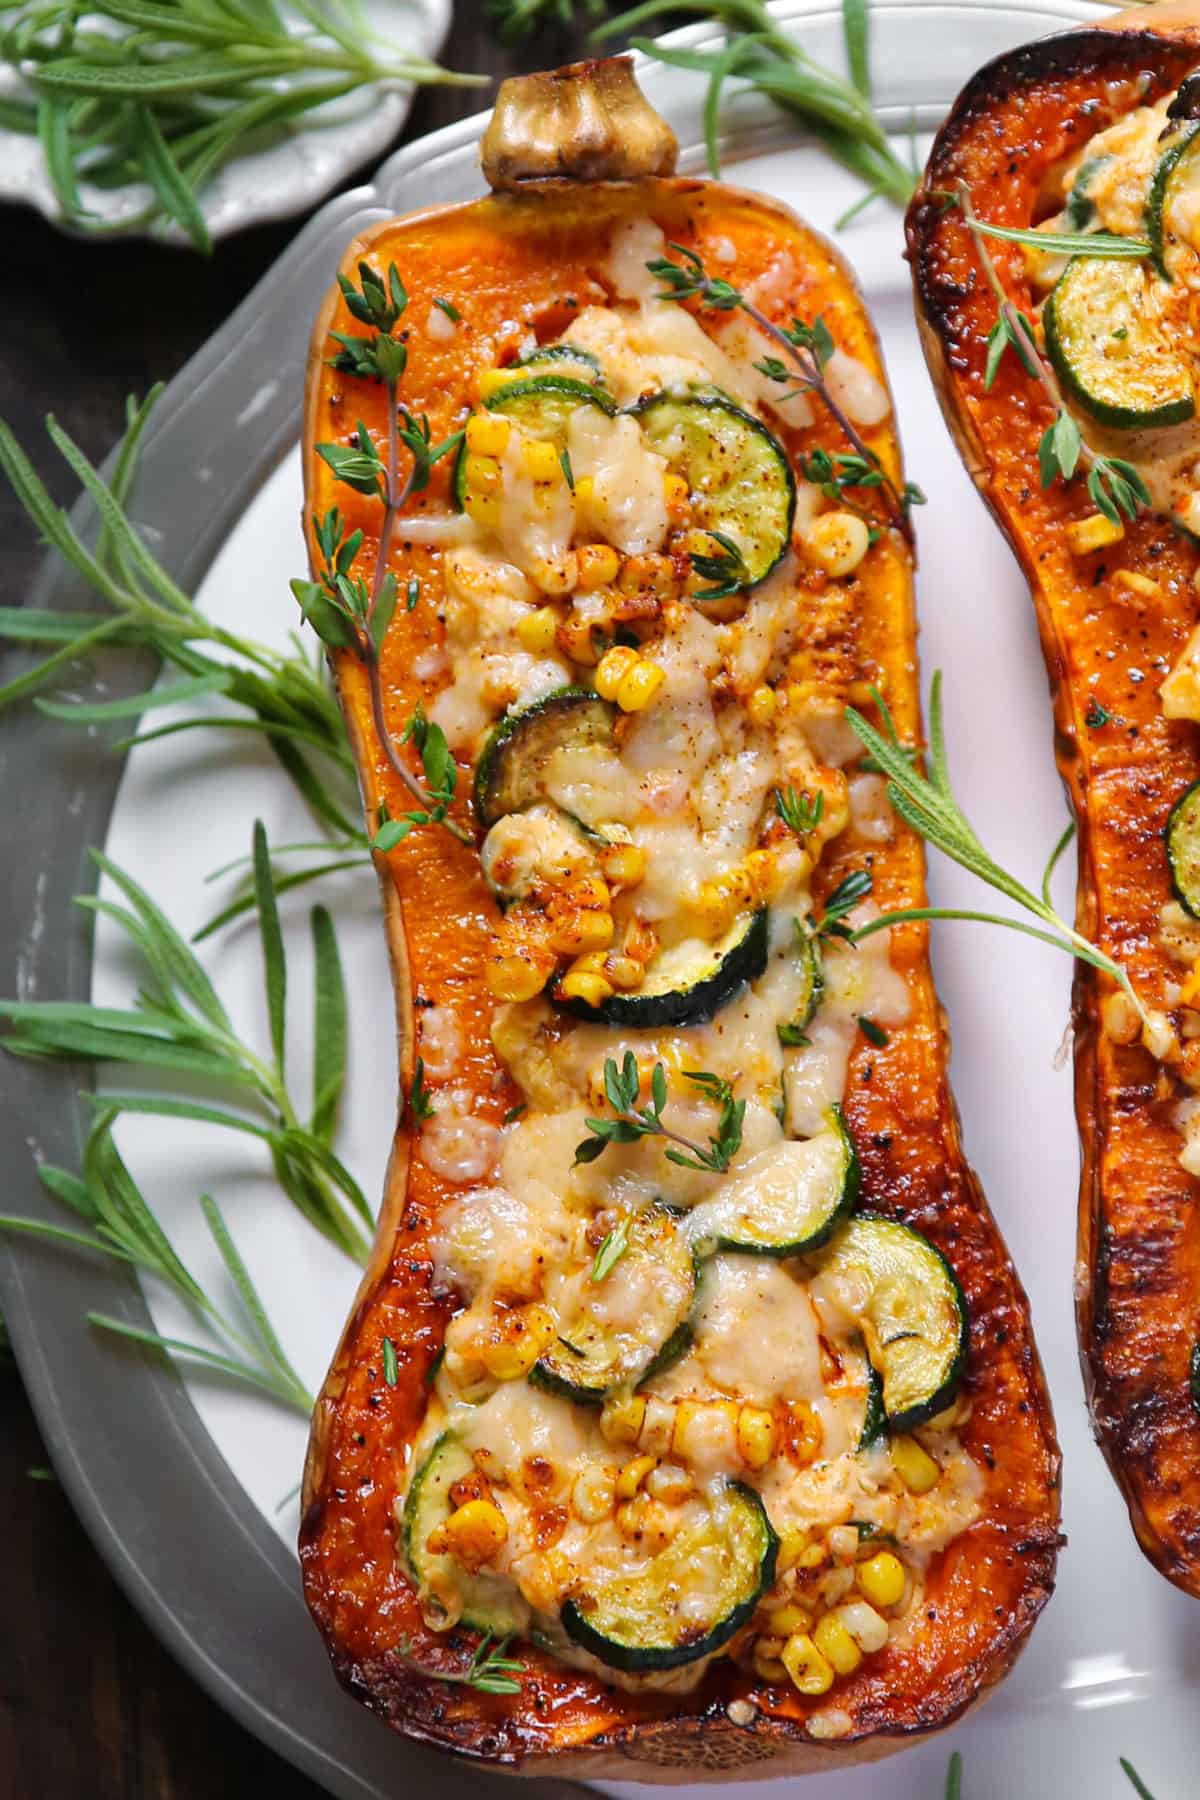 Roasted Butternut Squash Half stuffed with Corn, Zucchini, and Cheese - on a white plate.